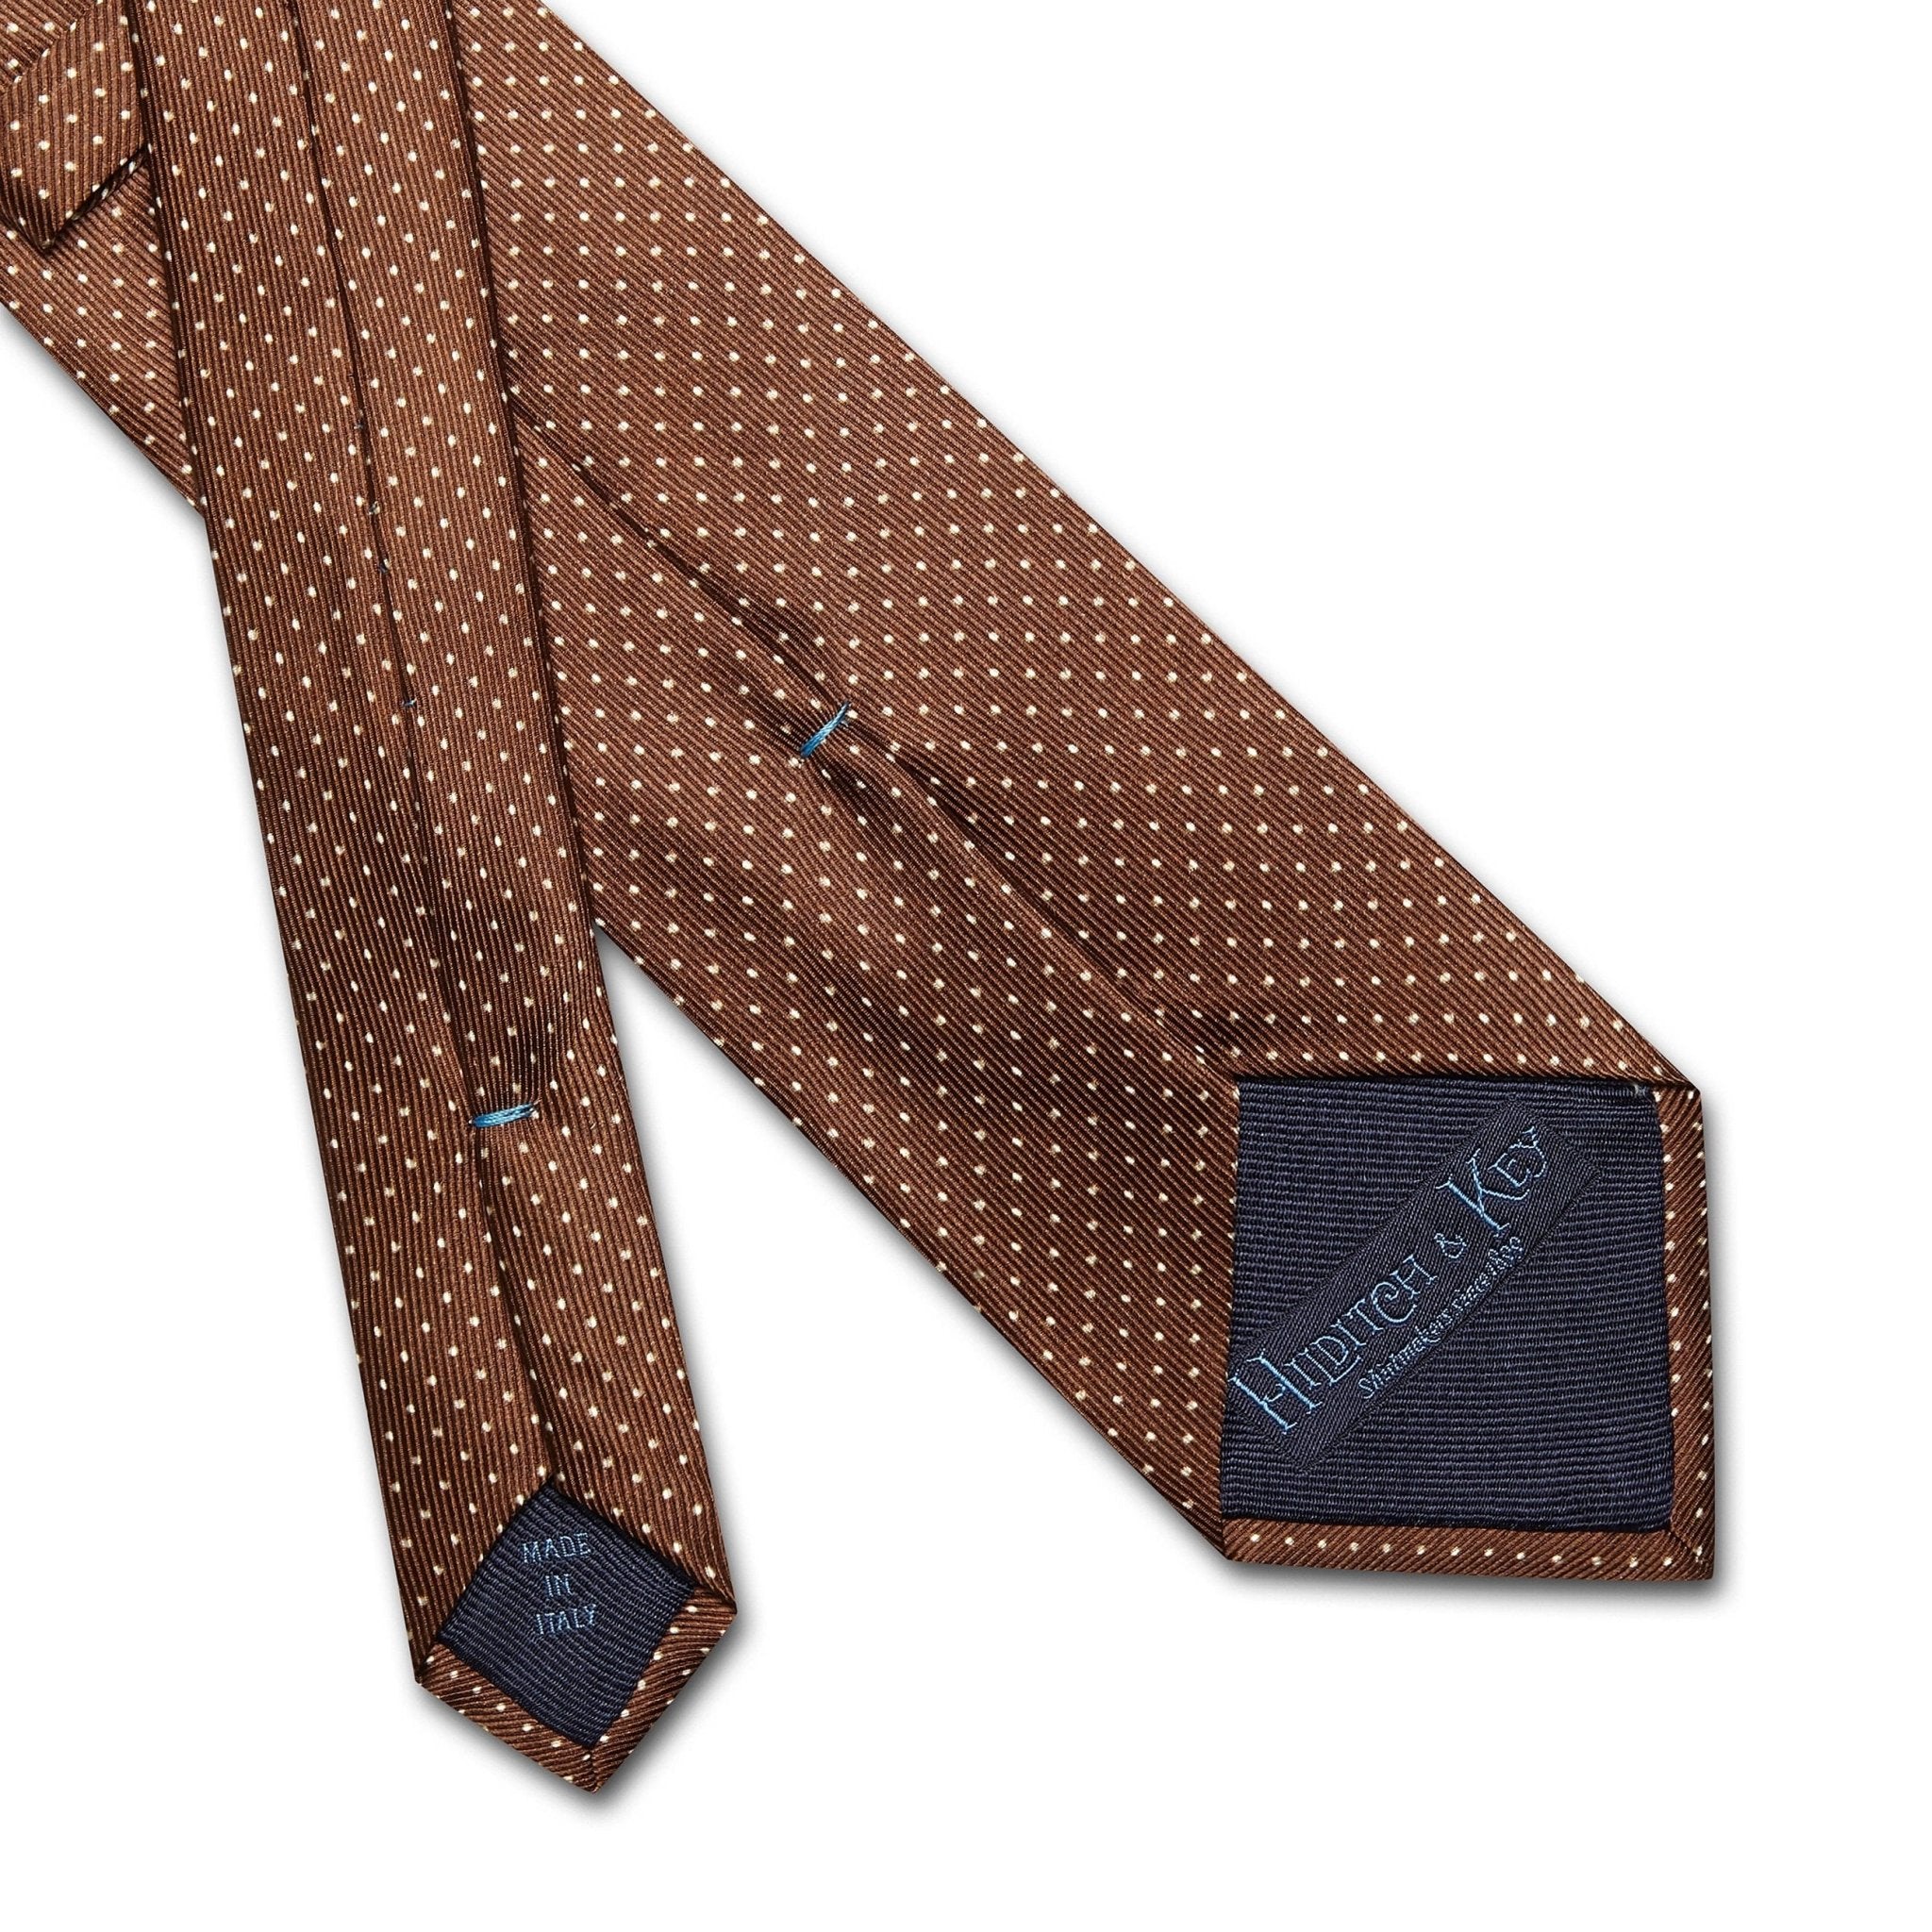 Brown Printed Silk Tie with White Pin Spots